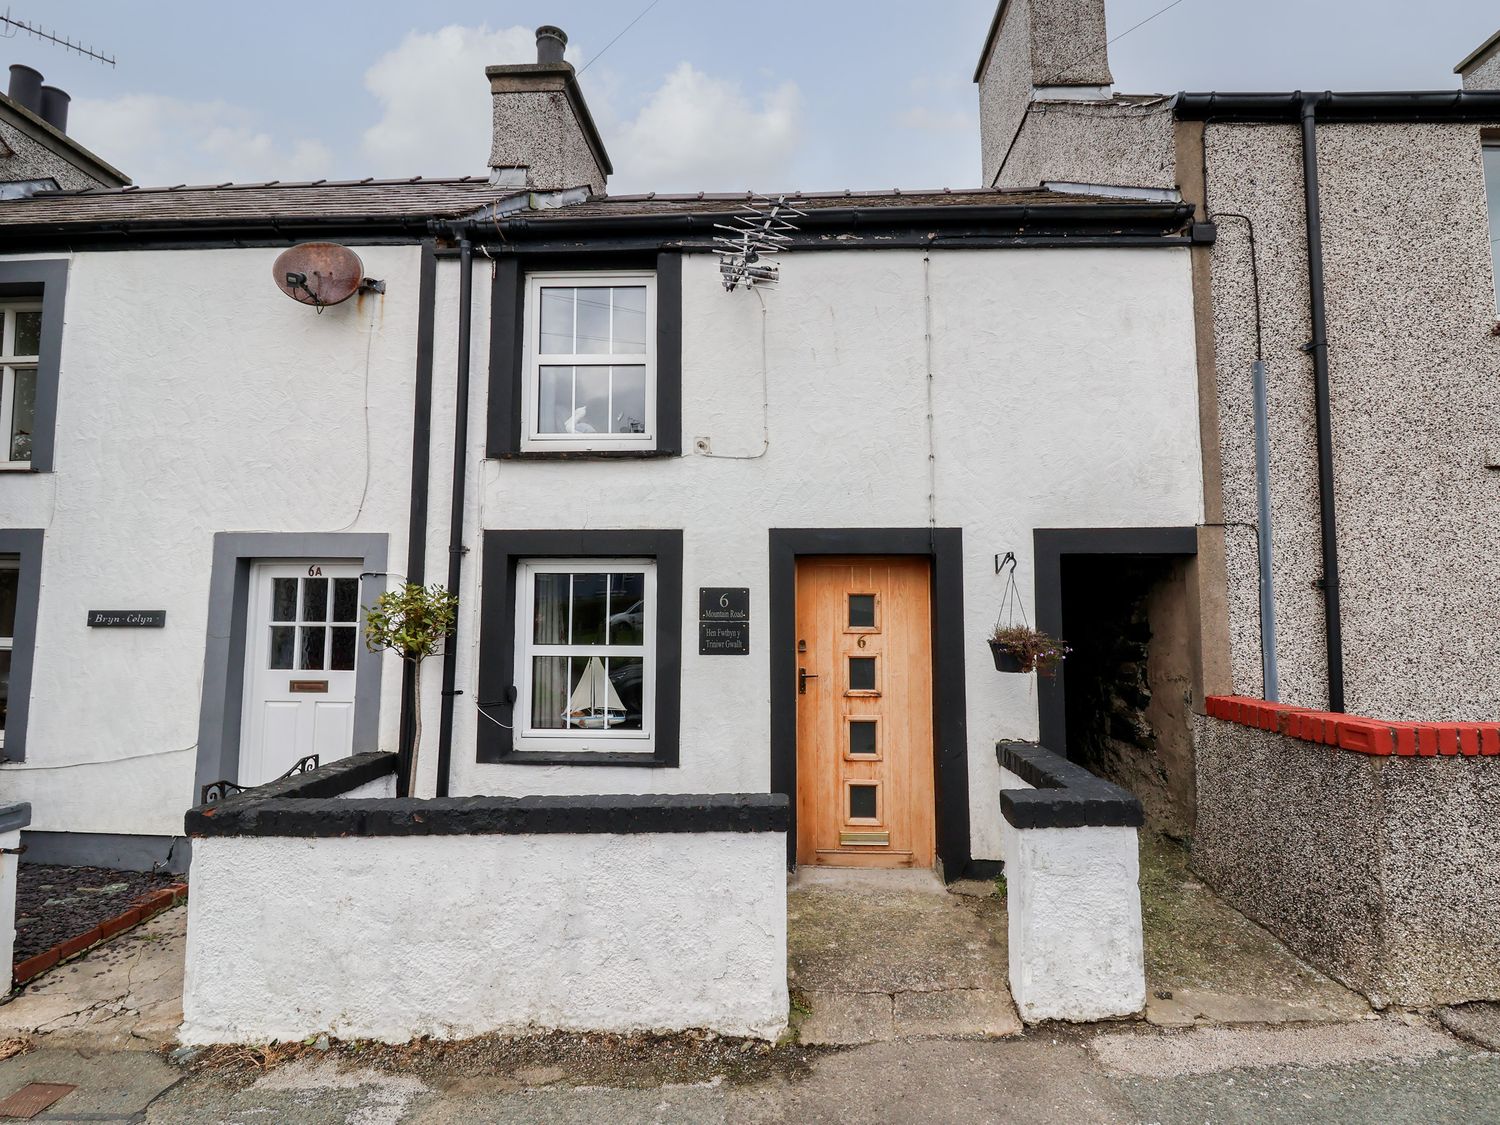 6 Mountain Road - Anglesey - 1107385 - photo 1